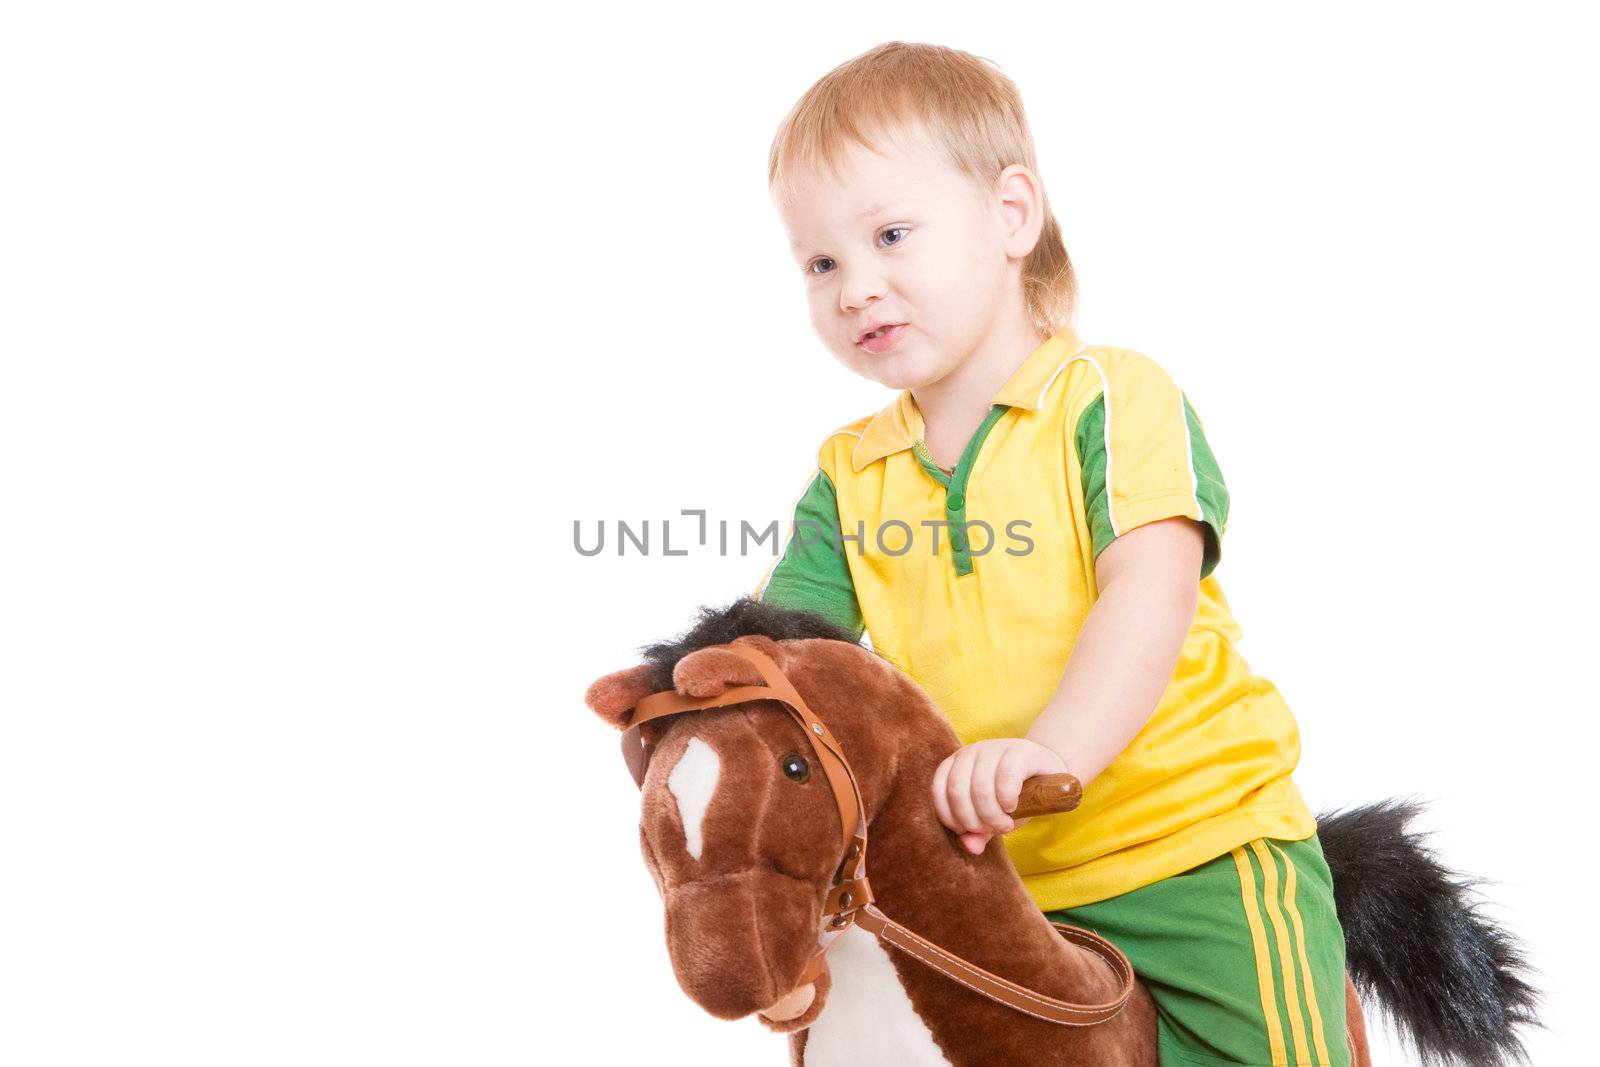 a boy of three years old riding a toy horse